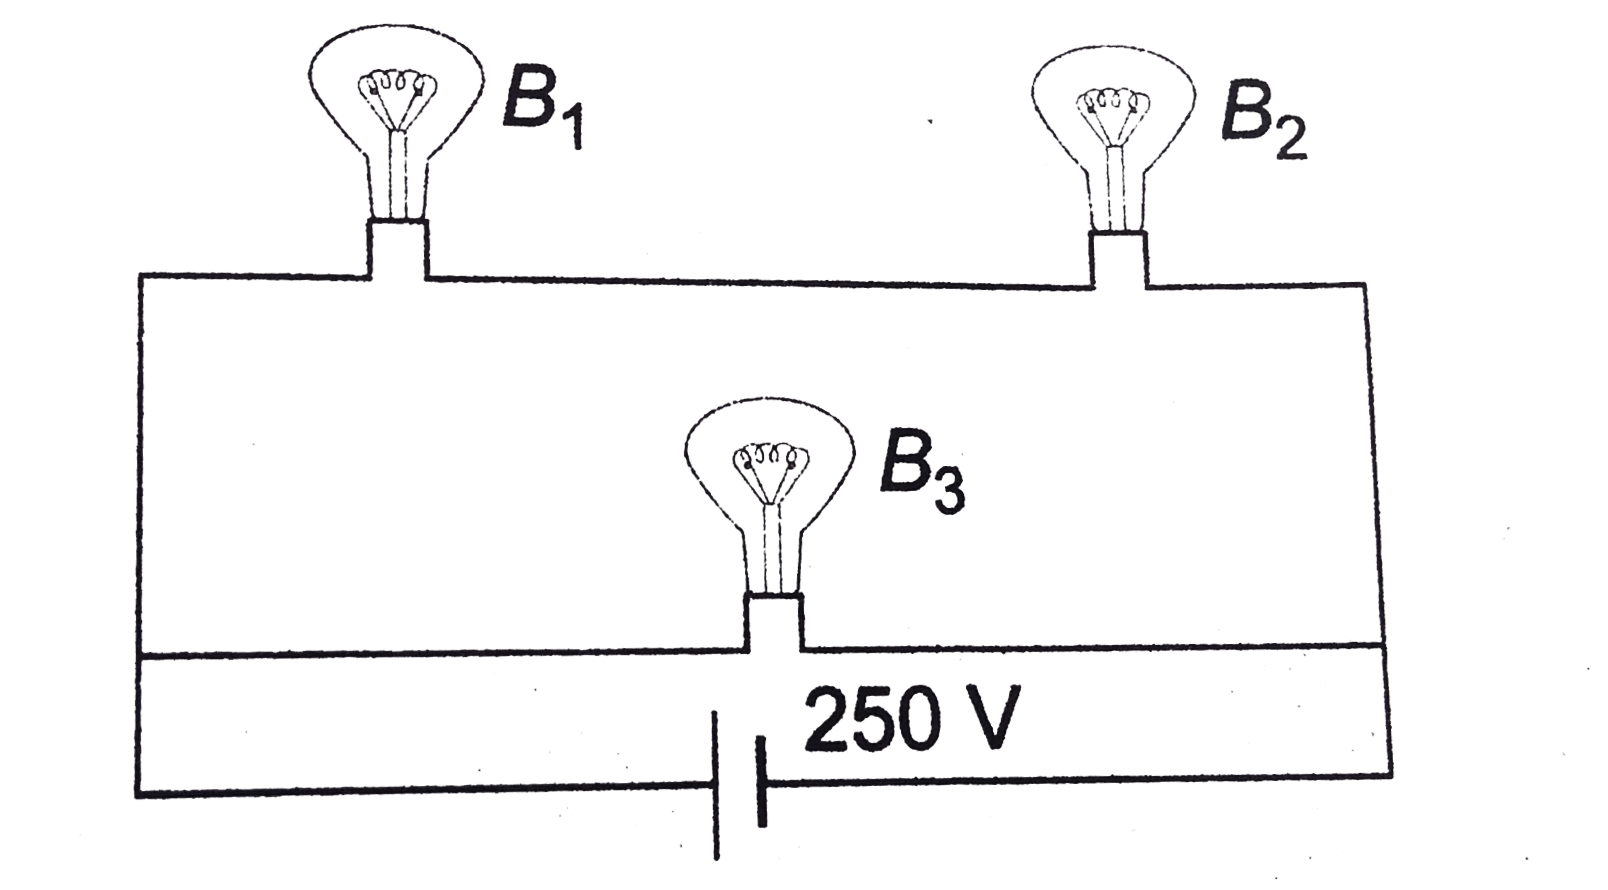 A 100 W bulb B1, and two 60 W bulbs B2 and  B3 are connected to a 250 V source as shown in the figure. Now W1,W2 and W3 are the output powers of the bulbs B1, B2 and B3 respectively. Then